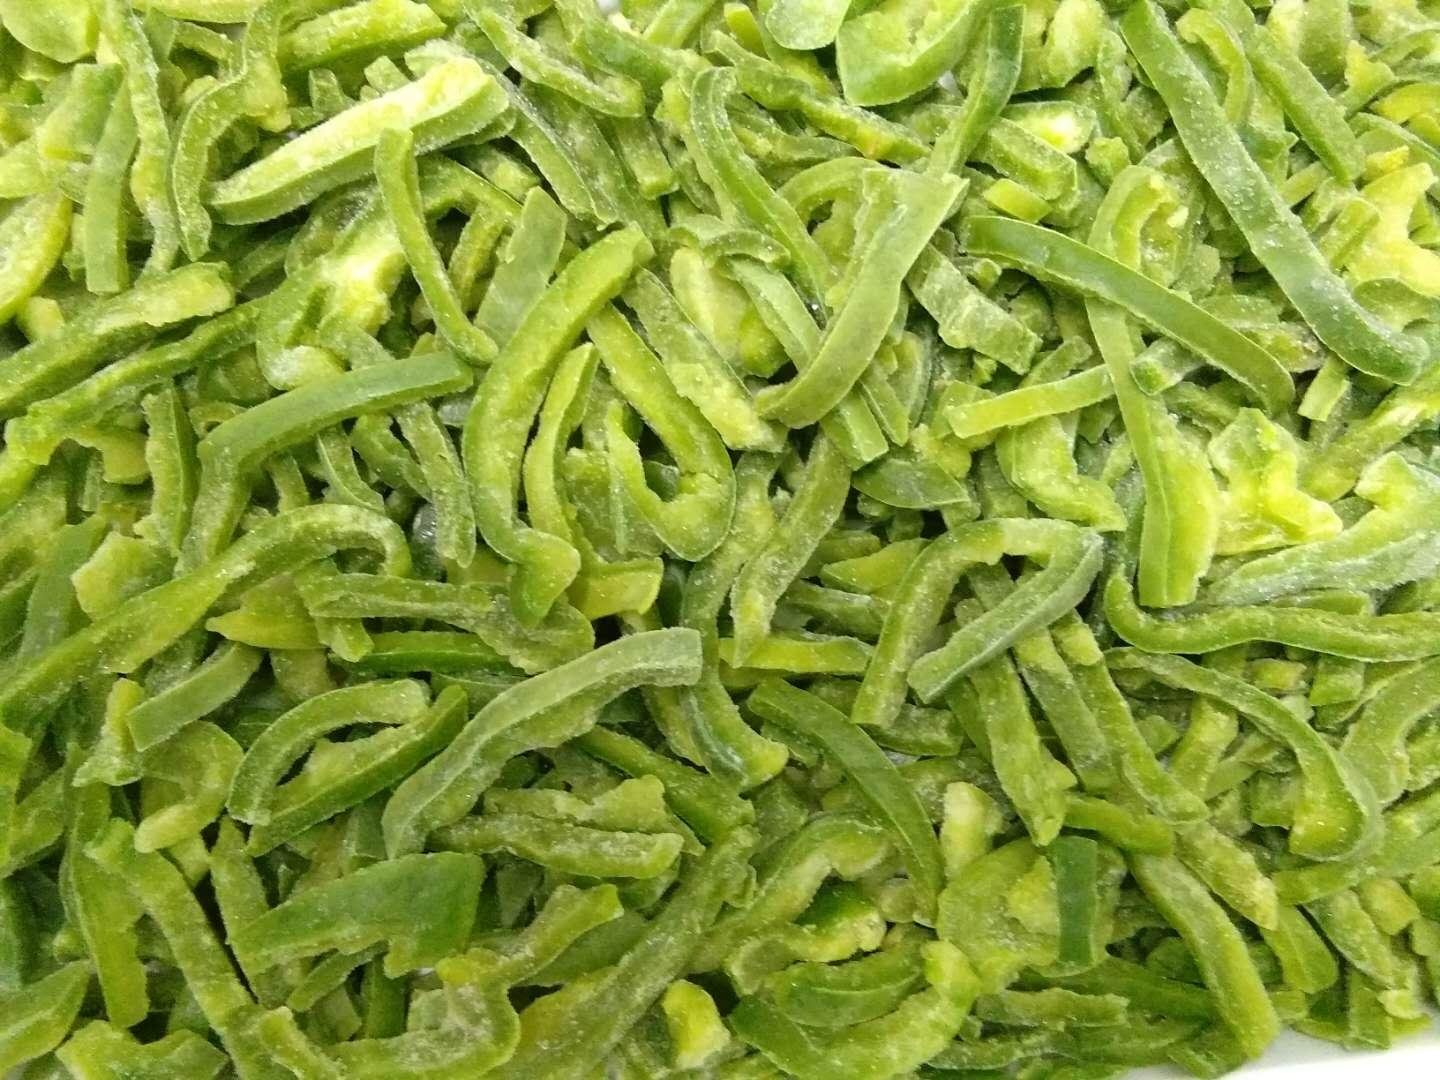 IQF Green Pepper Strips,Frozen Green Peppers Strips,IQF Sliced Green Peppers 5